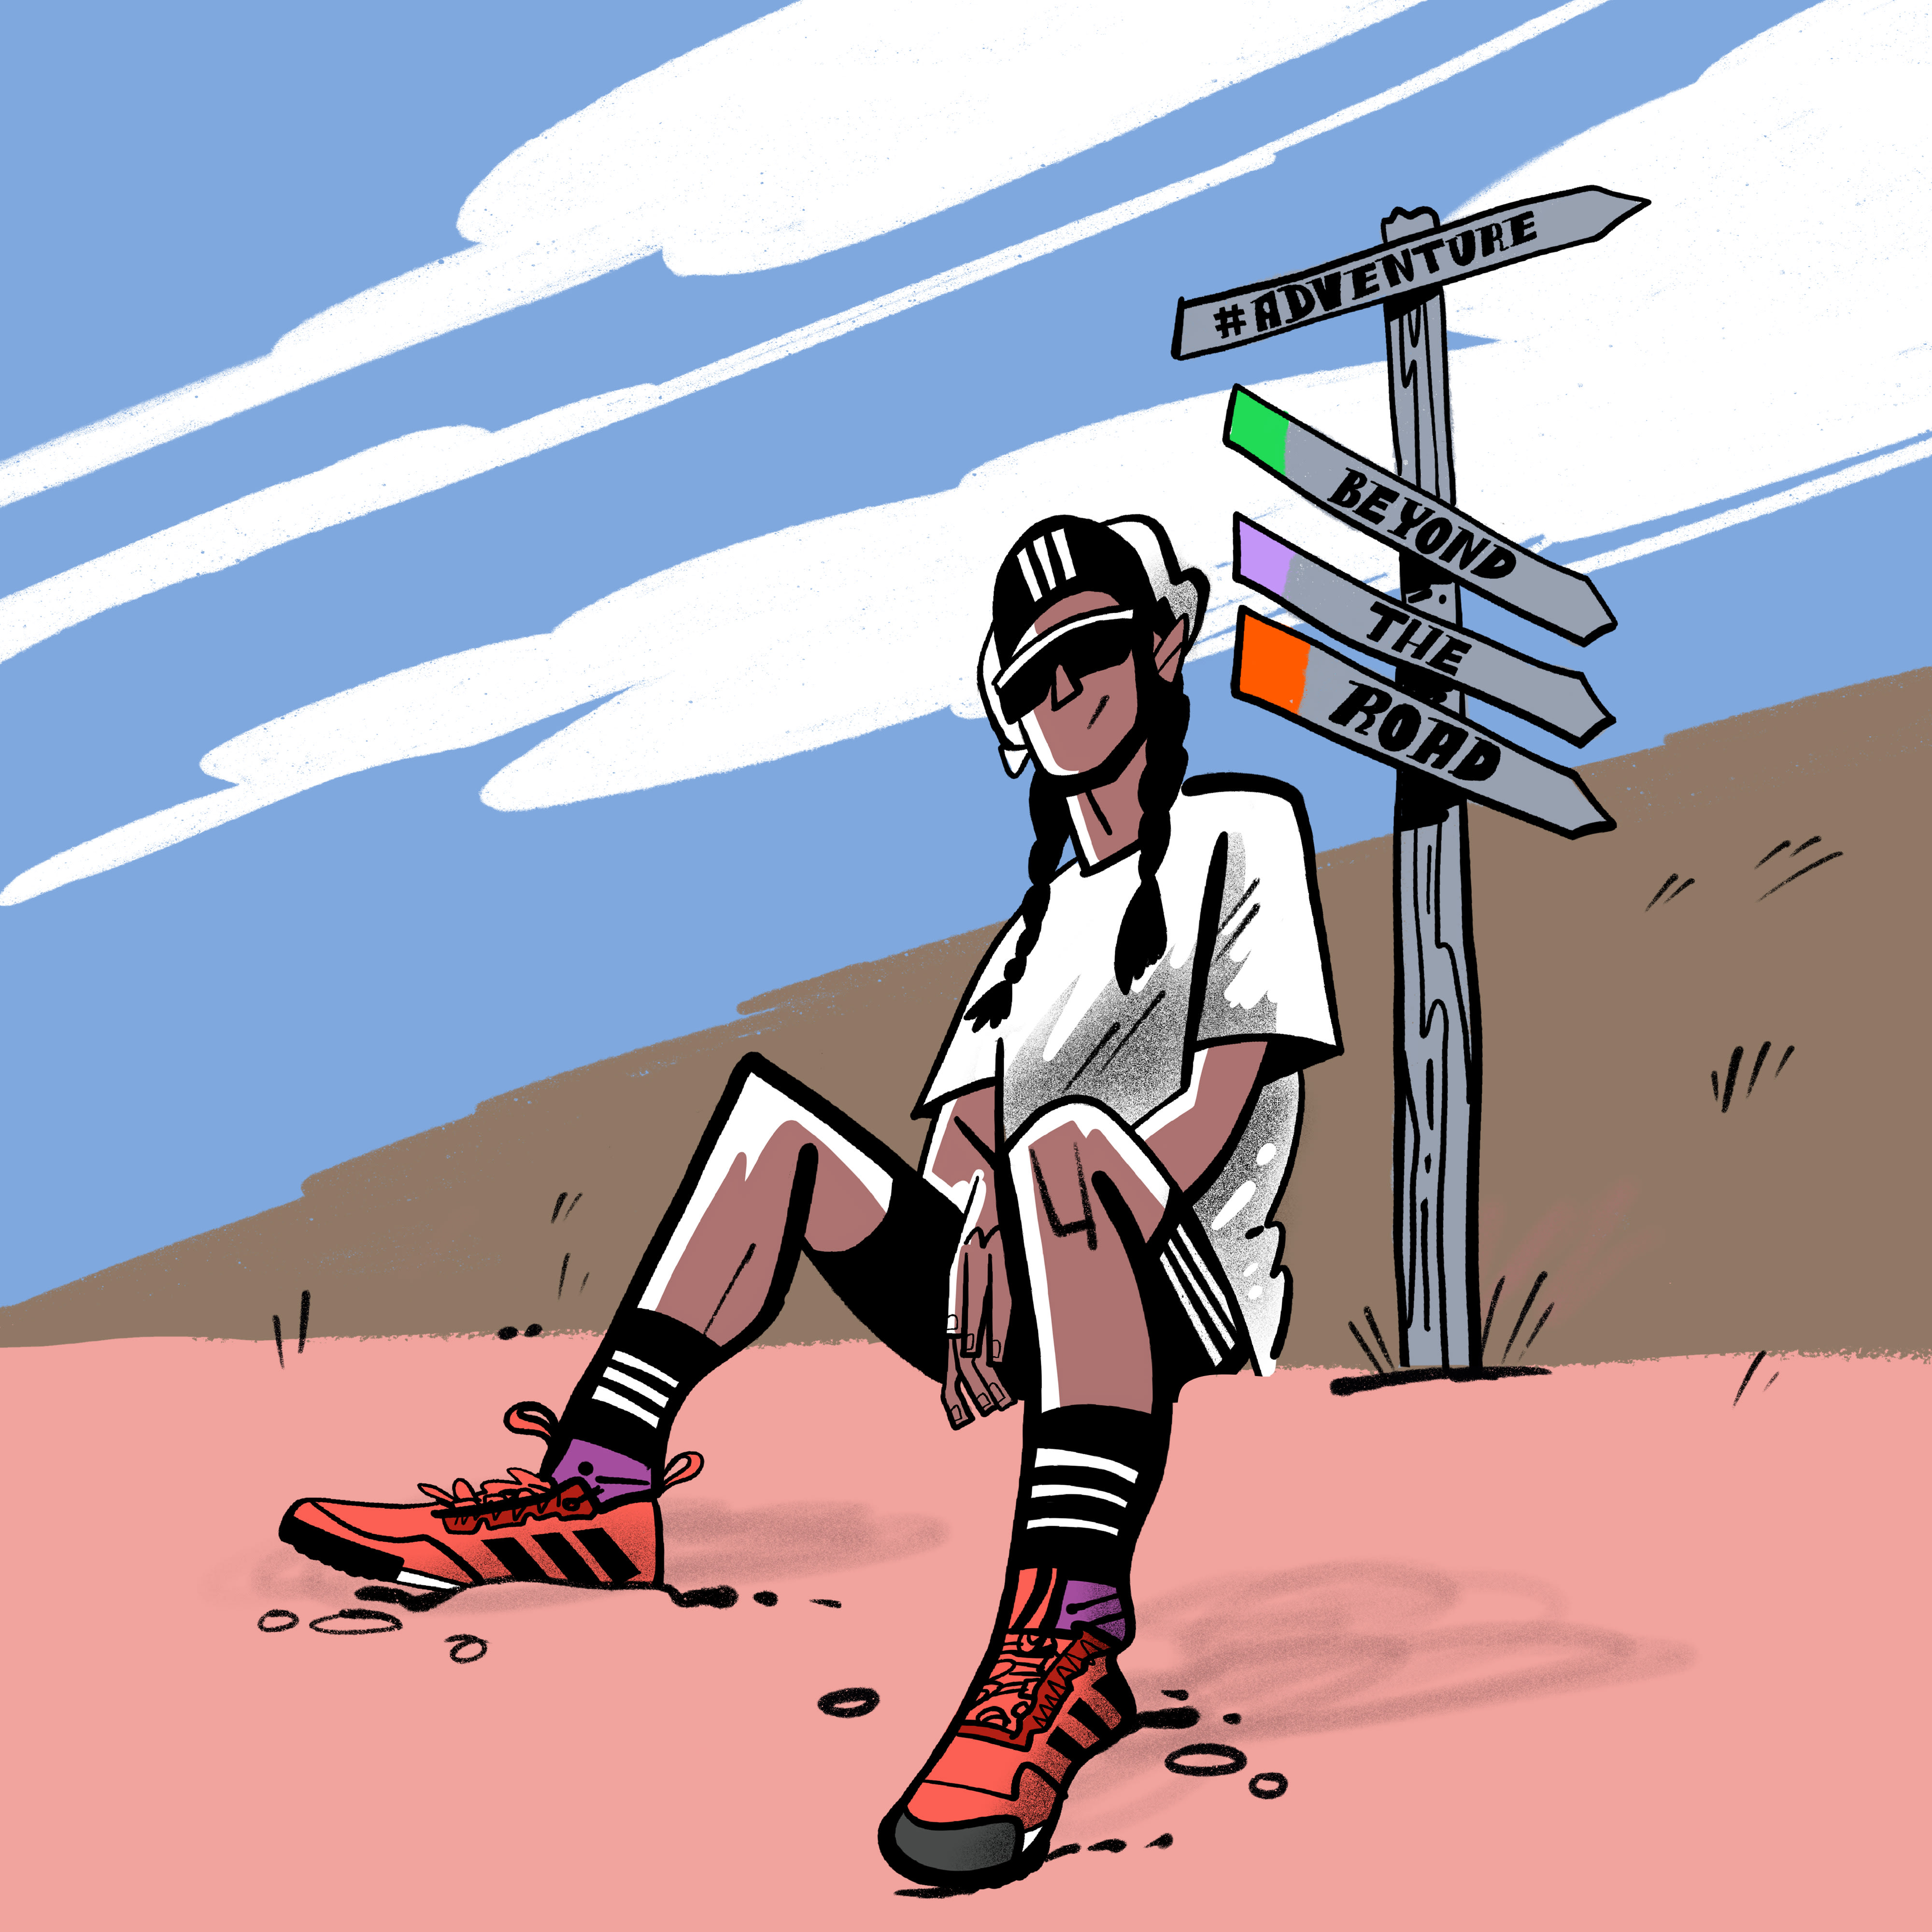 A colourful illustration of a person sat against a post that says